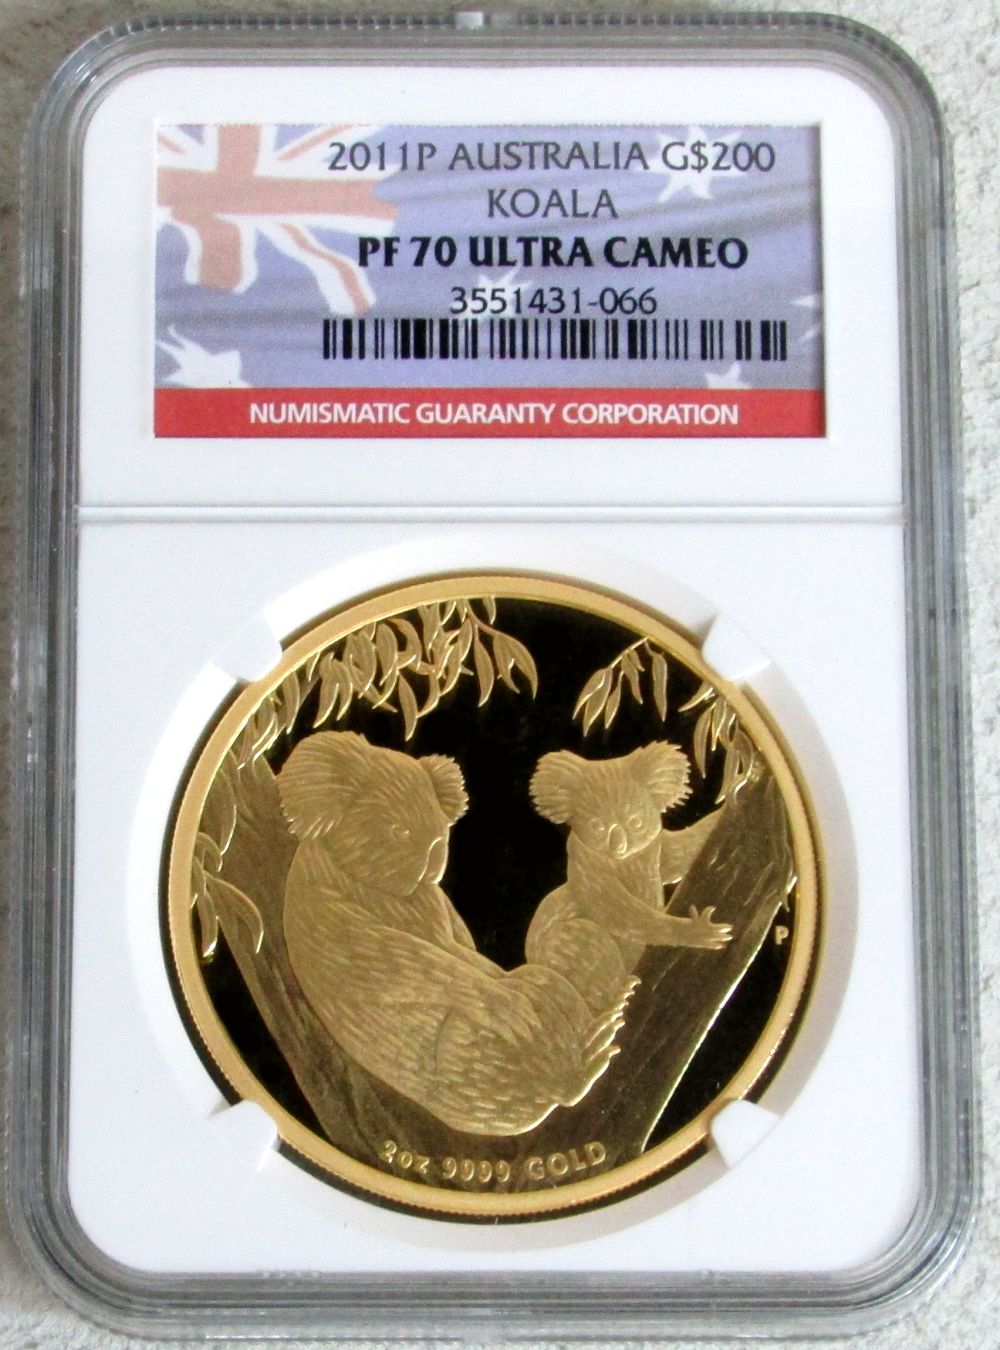 2011 PERTH MINT GOLD AUSTRALIA $200 KOALA NGC PERFECT PROOF 70 ULTRA CAMEO "2 OZ COIN" ONLY 250 MINTED 